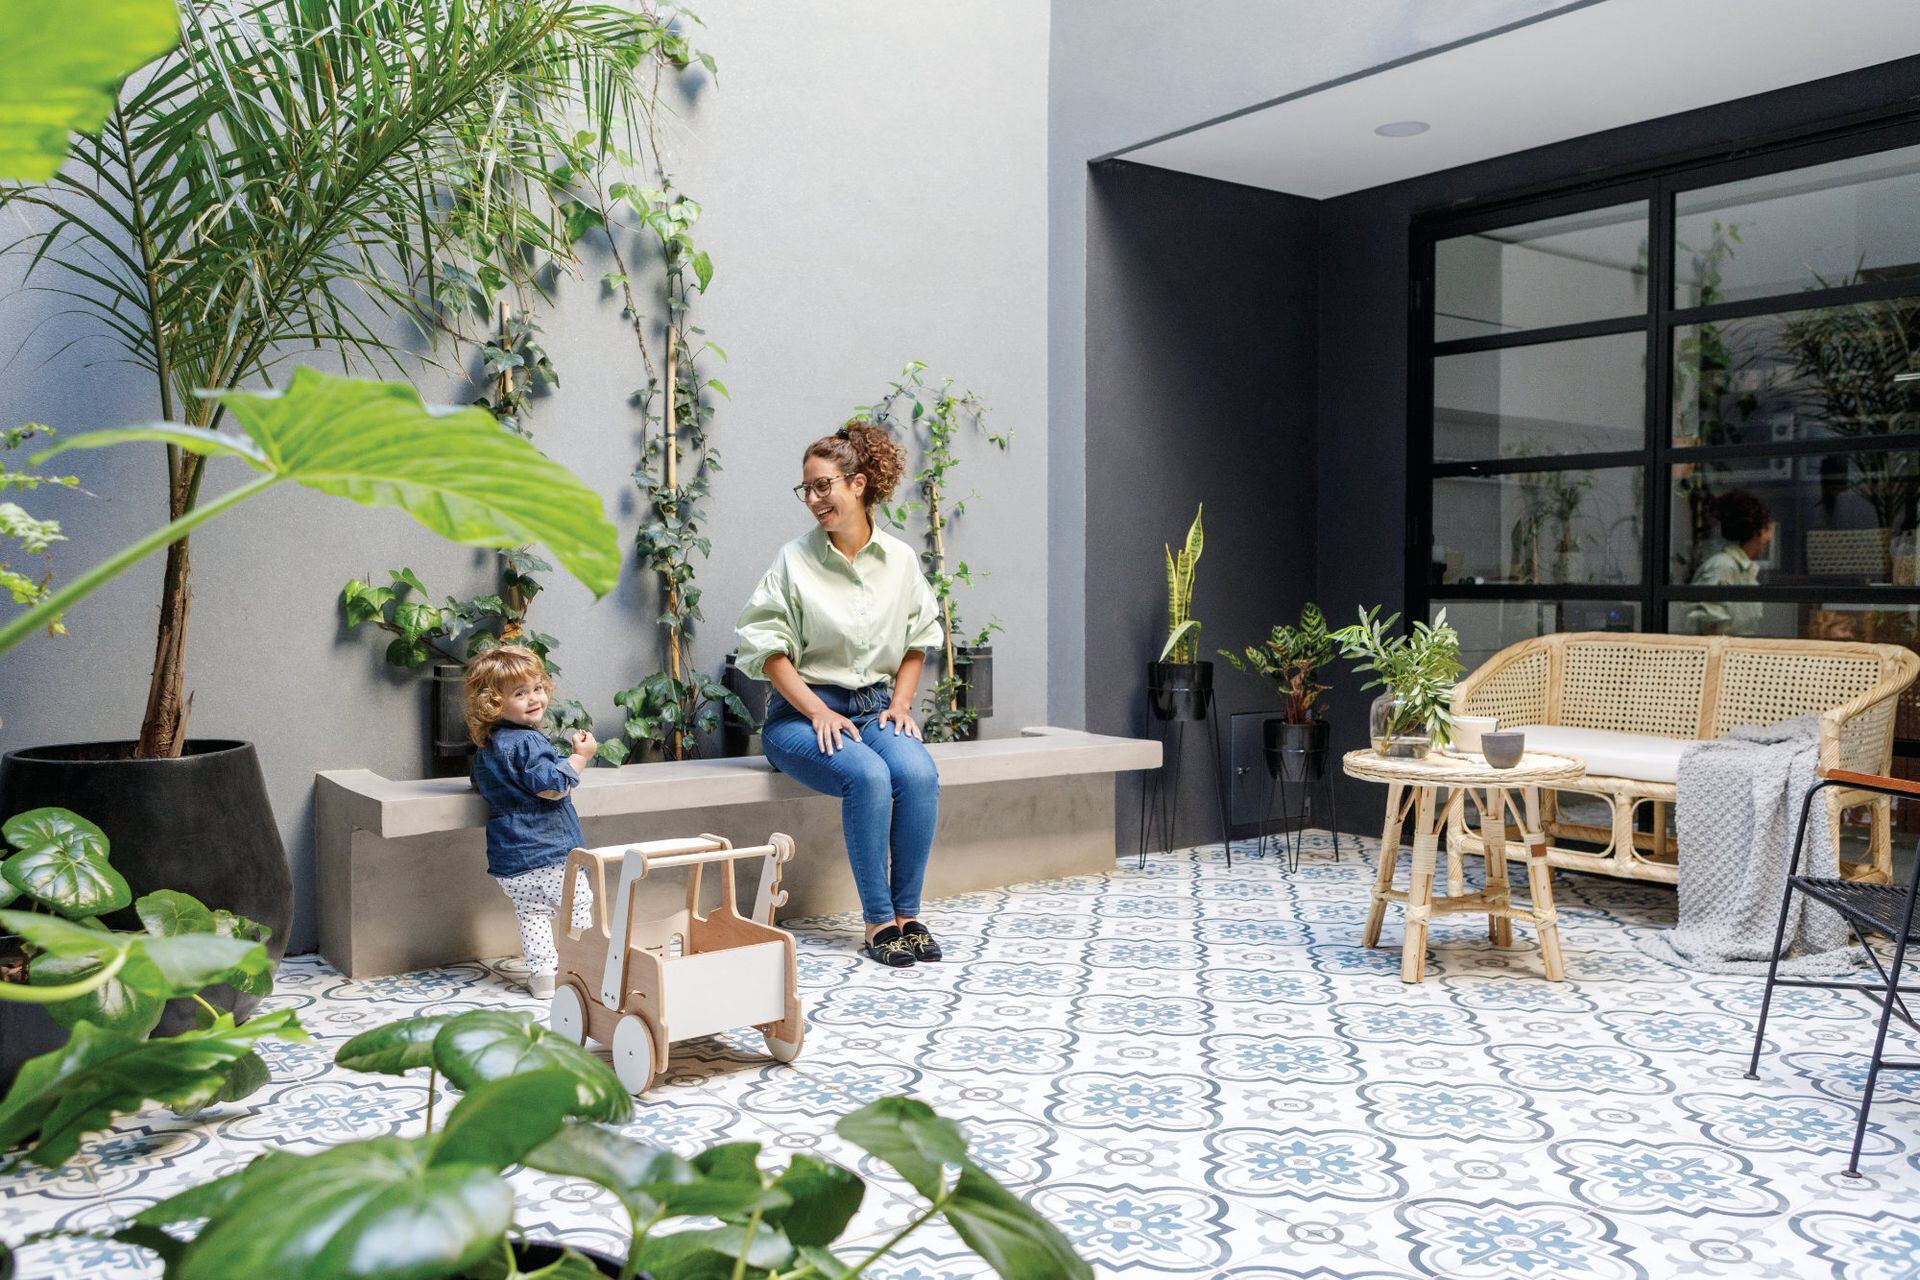 'Denver' floor (Cerámica Piú).  'Egyptian Stone' plastic plaster, by Quimtex.  Low table in front of the armchair (CeCe Piume).  Blanket (Oma).  Vase (María Paula House).  Table with pots (Pallet Store).  Plants (Tebi Inspired Spaces).